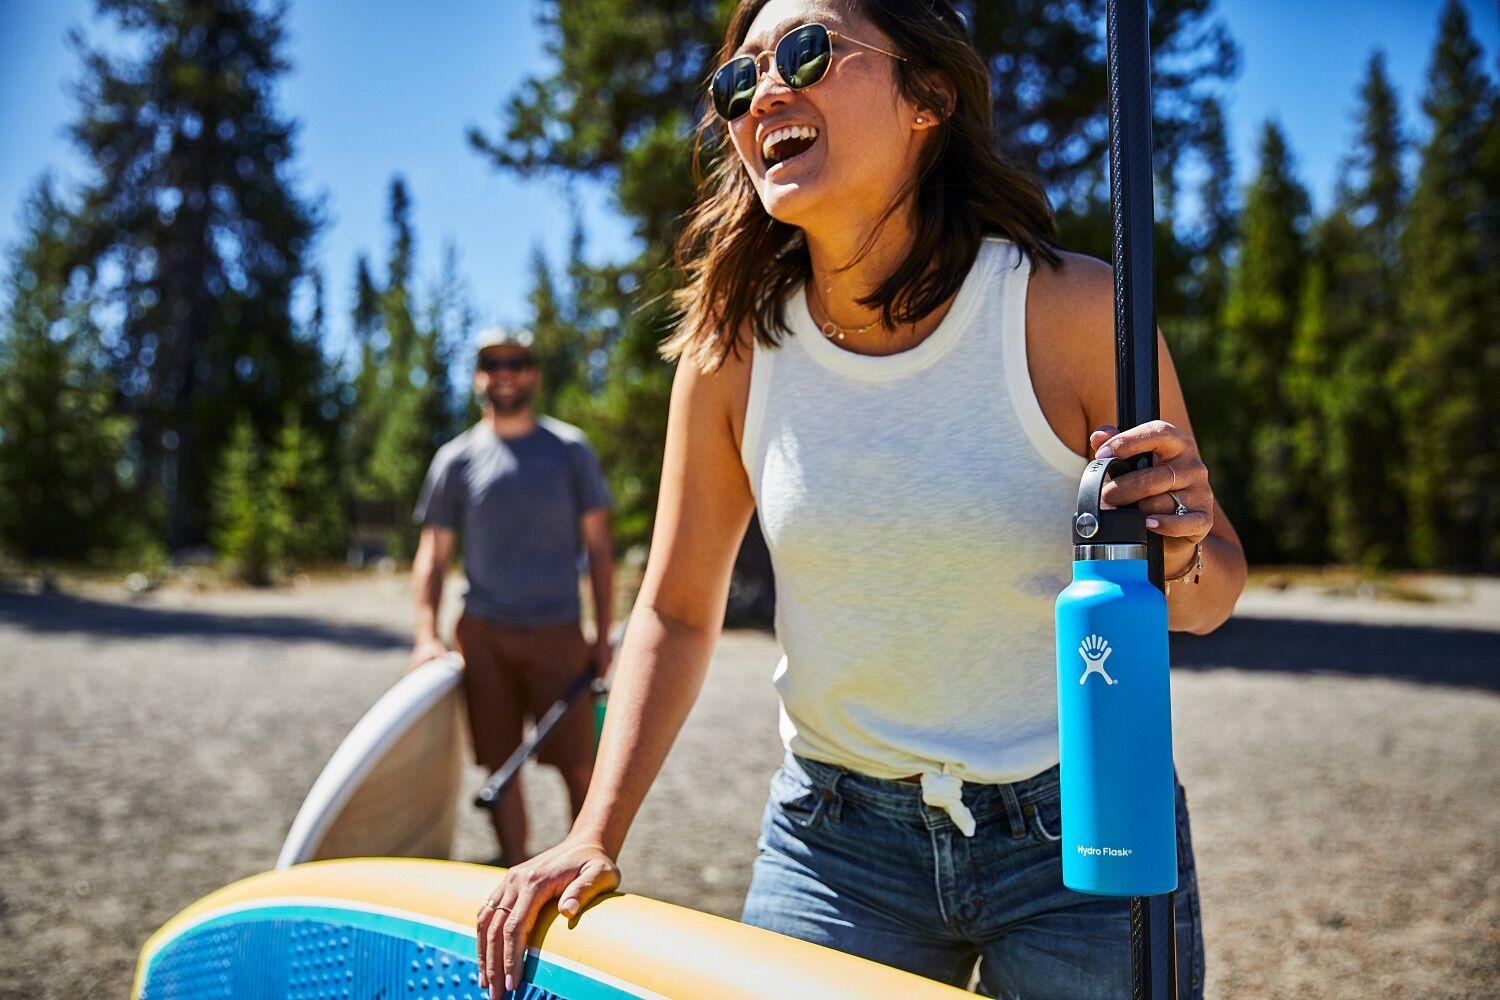 https://www.drivemerch.com/wp-content/uploads/2022/08/branded-hydro-flask-standard-mouth-with-flex-cap-21-oz-pacific-lifestyle.jpg